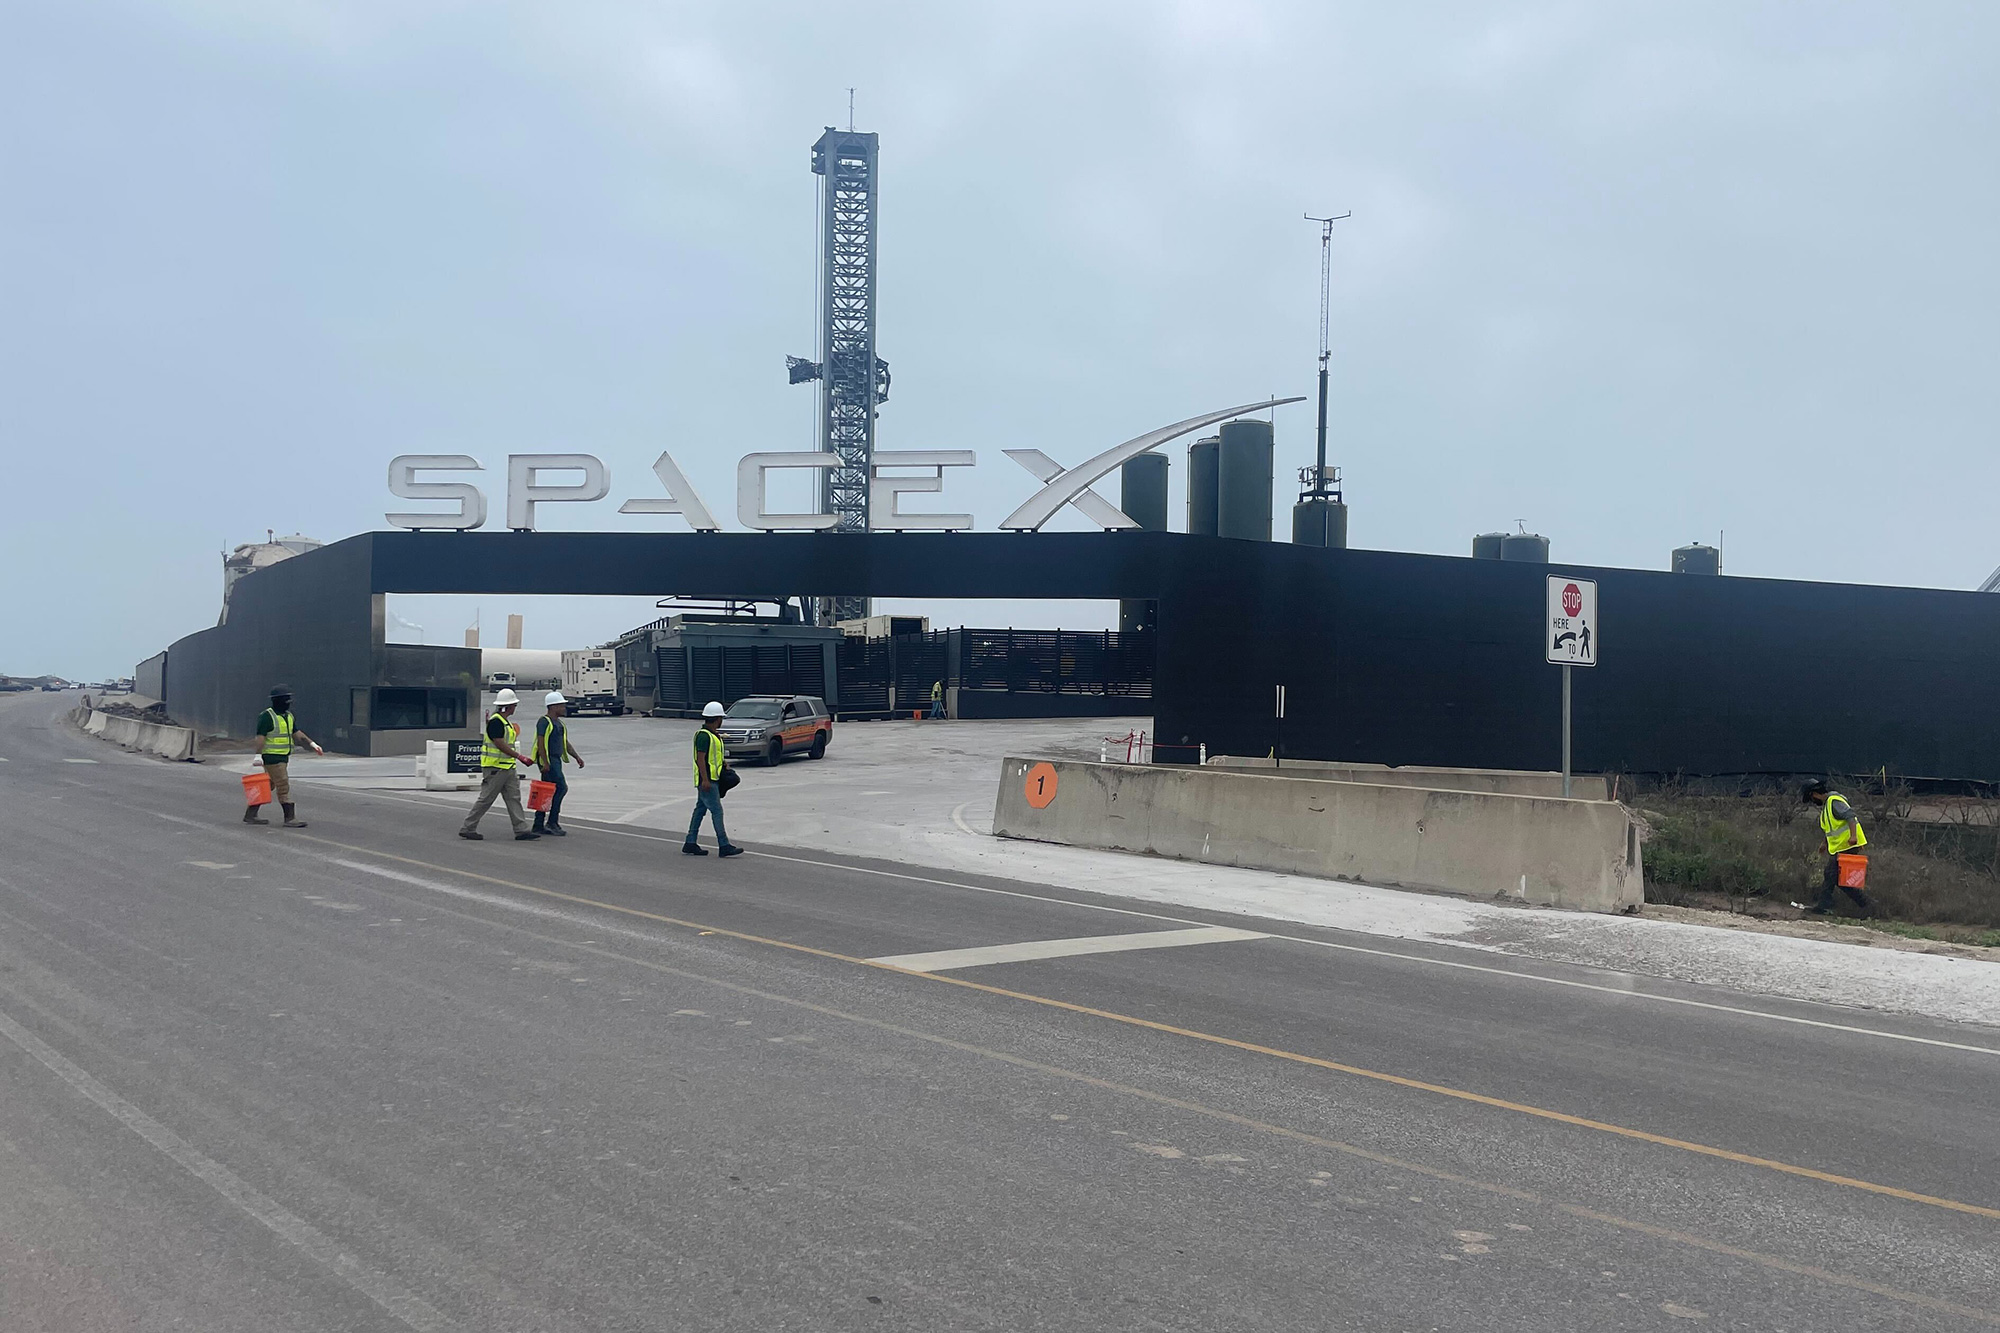 Members of an unaffiliated cleanup crew pick up debris around SpaceX Starbase after the Starship launch near Brownsville, Texas, on March 14.